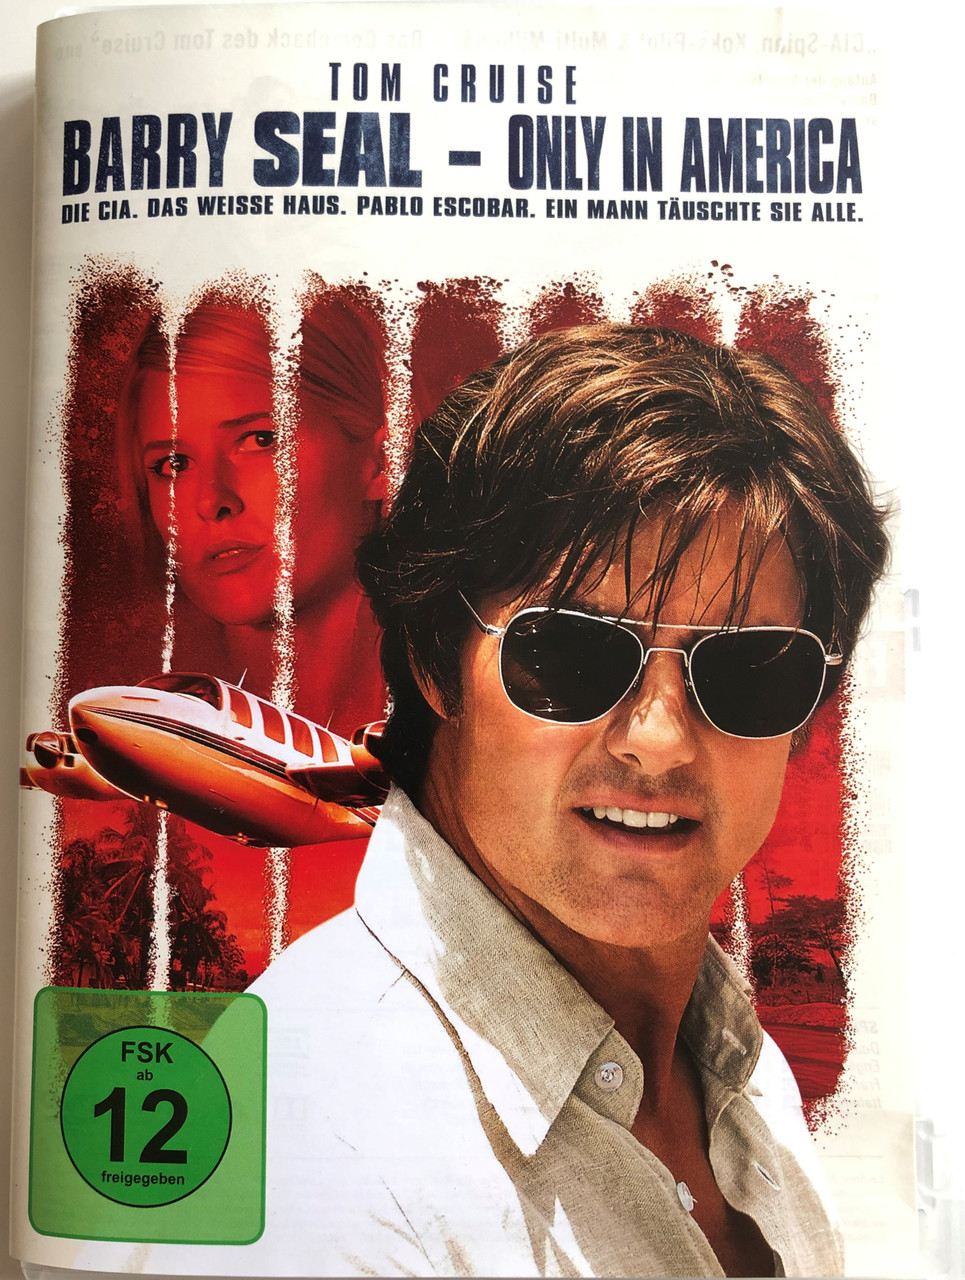 American made DVD 2017 Barry Seal - Only in America / Directed by Doug  Liman / Starring: Tom Cruise, Domhnall Gleeson, Sarah Wright, Jesse Plemons  - Bible in My Language